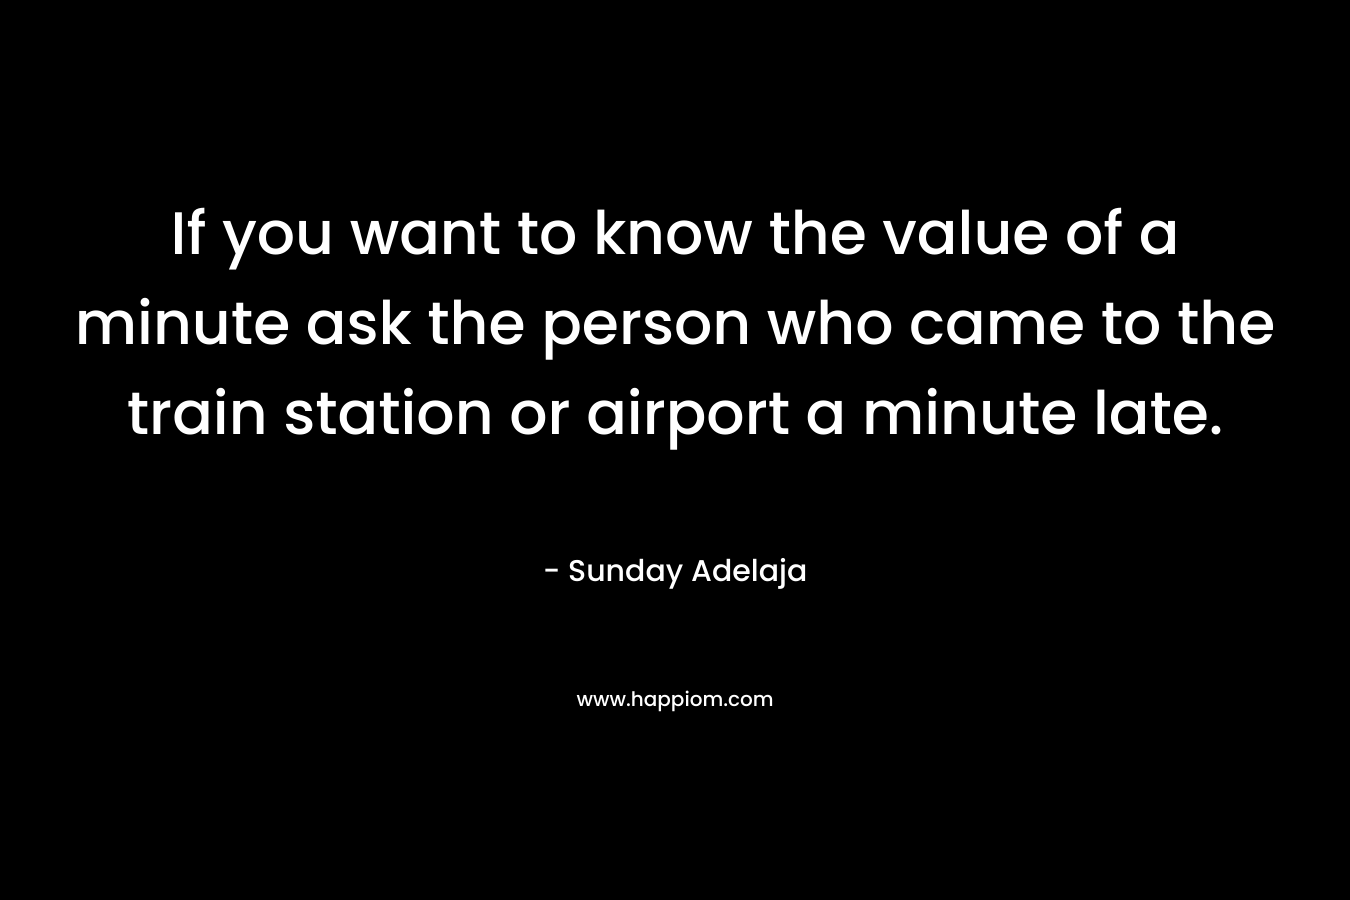 If you want to know the value of a minute ask the person who came to the train station or airport a minute late. – Sunday Adelaja